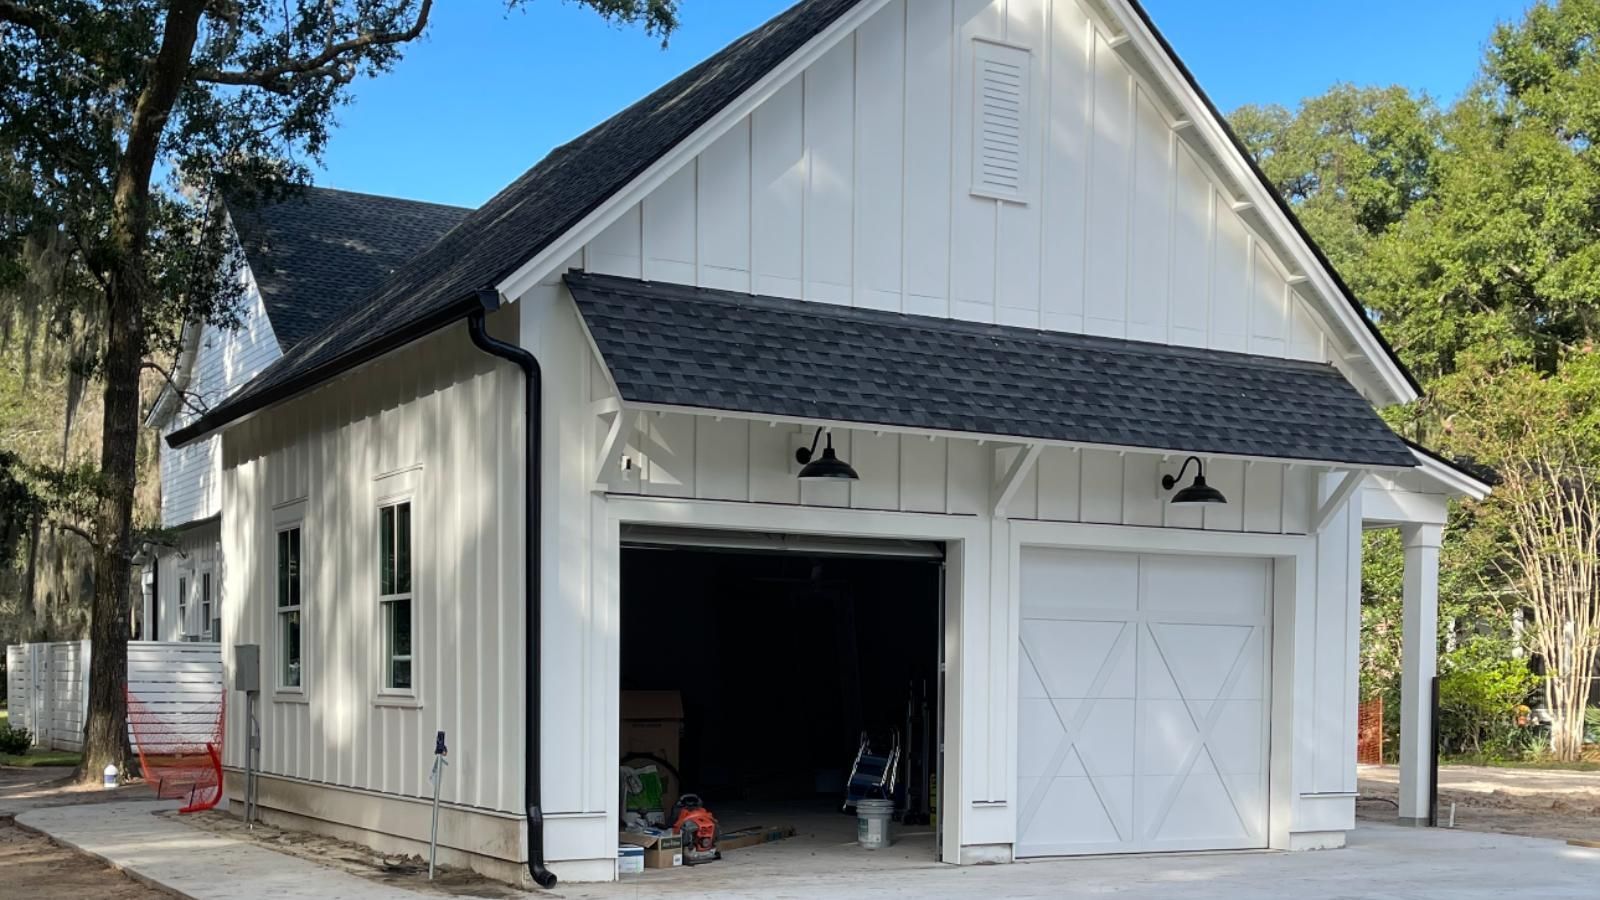 A white garage with a black roof and new gutters is sitting next to a house.